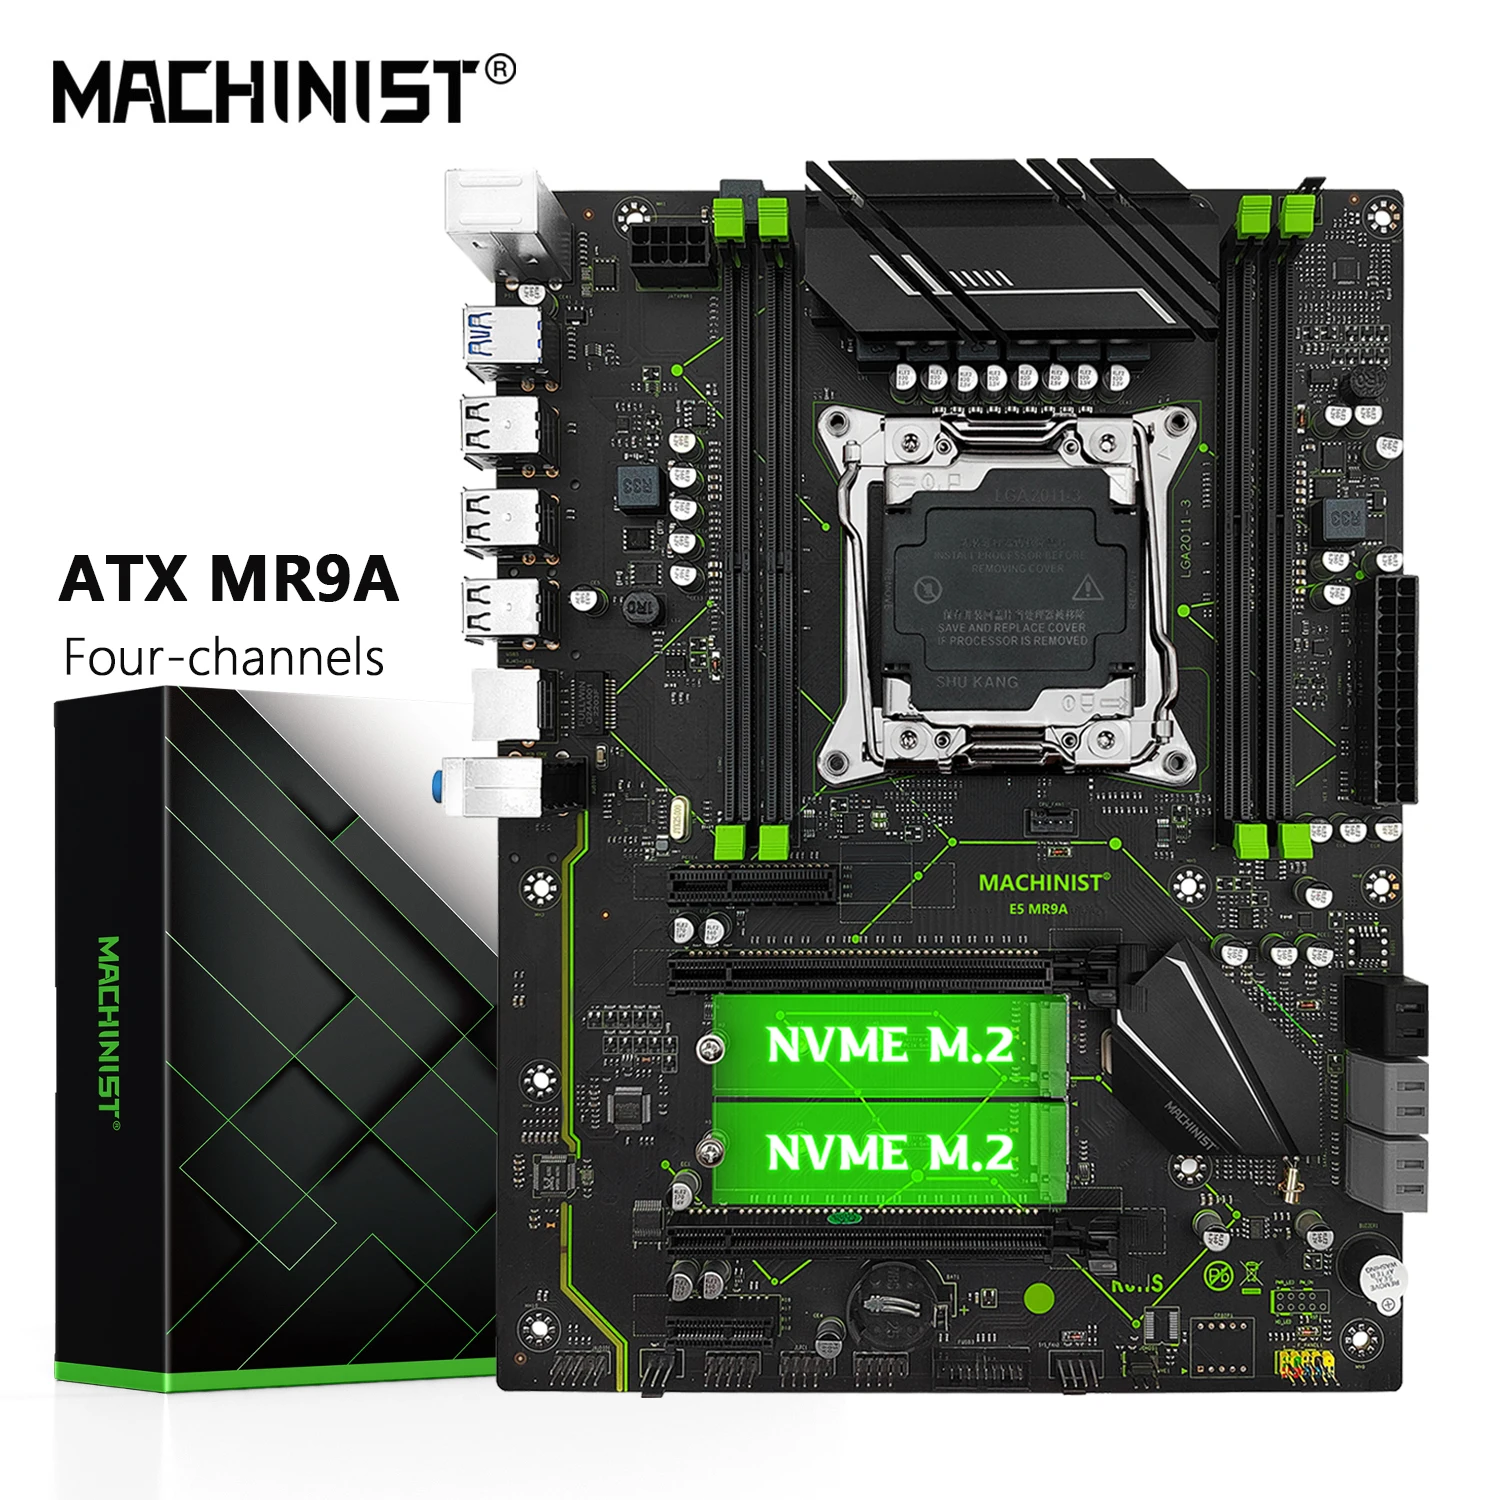 MACHINIST X99 MR9A Motherboard LGA 2011-3 Support Xeon E5 2667 2690 V4 2670 V3 CPU procesador Set DDR4 Memory ATX Four-channel